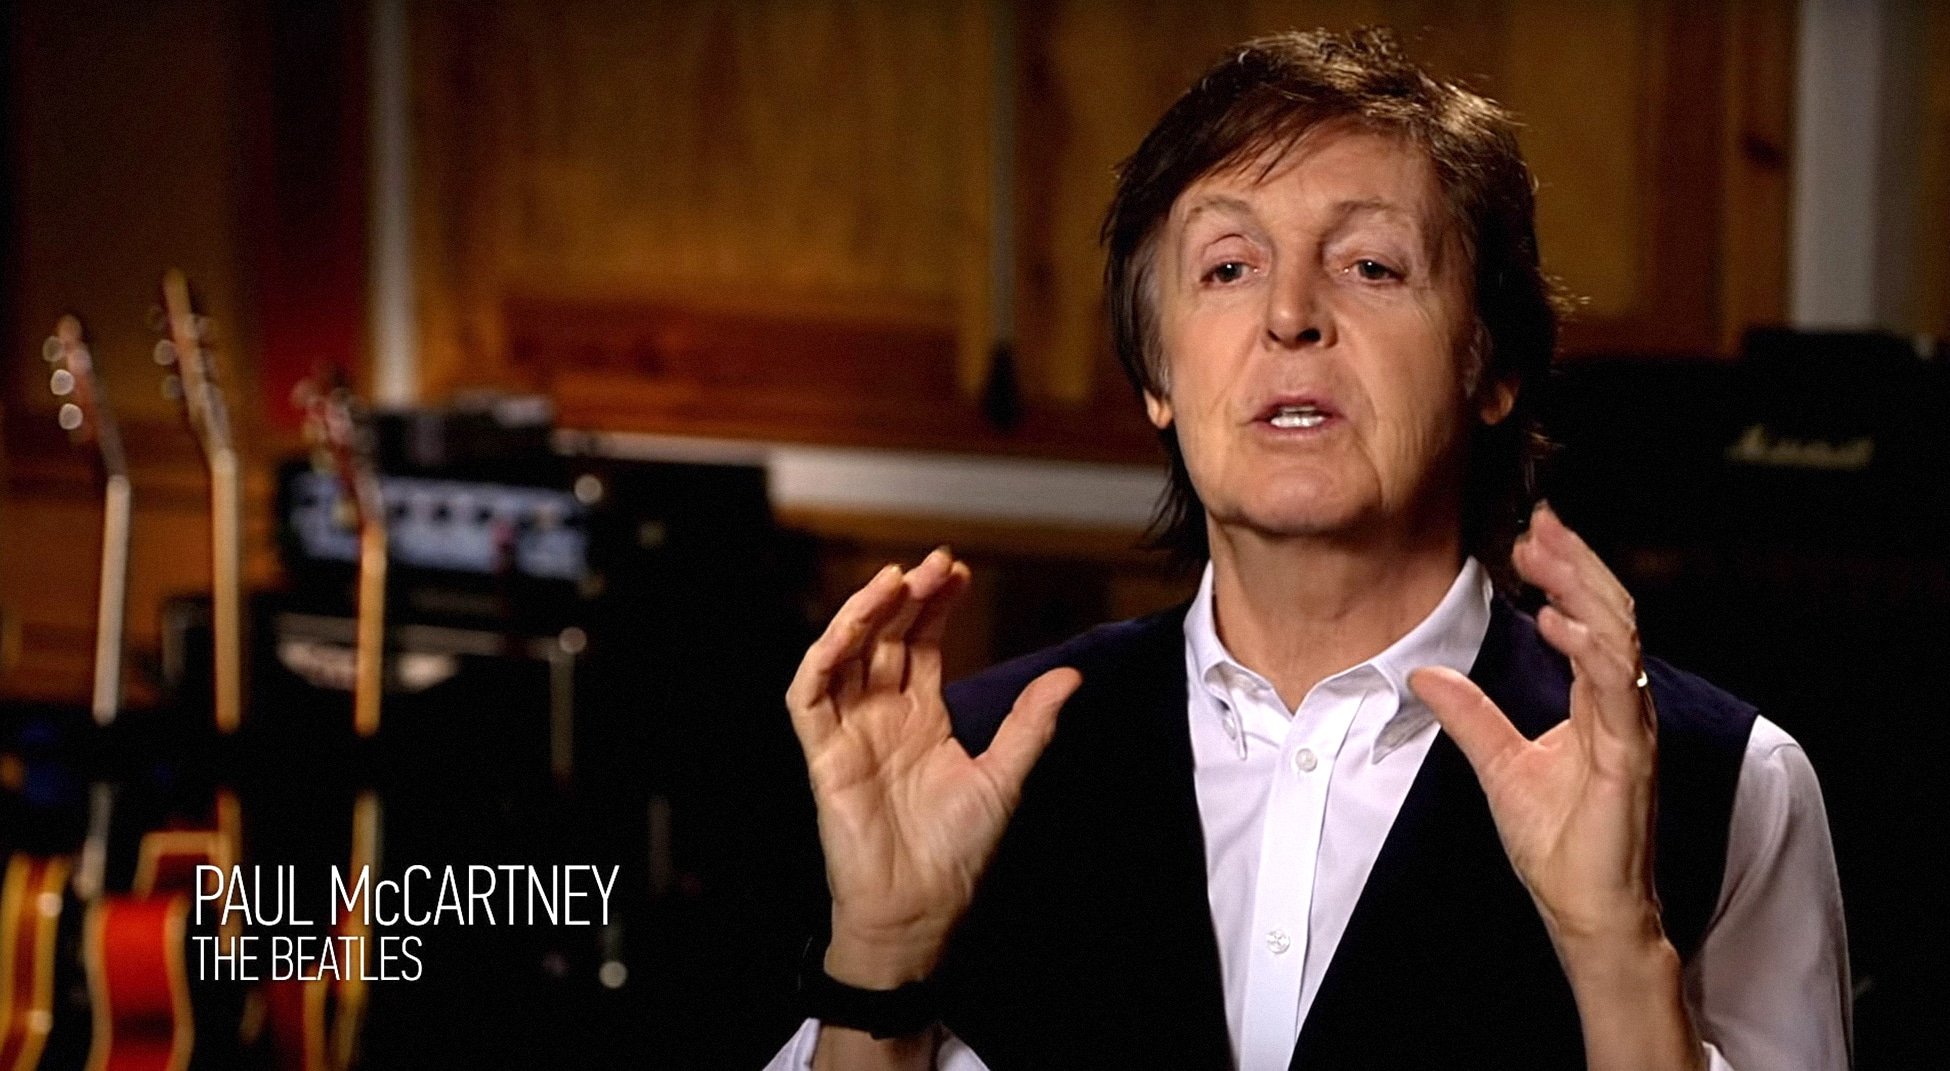 Paul McCartney Claims He Speaks To Late George Harrison Through This Tree